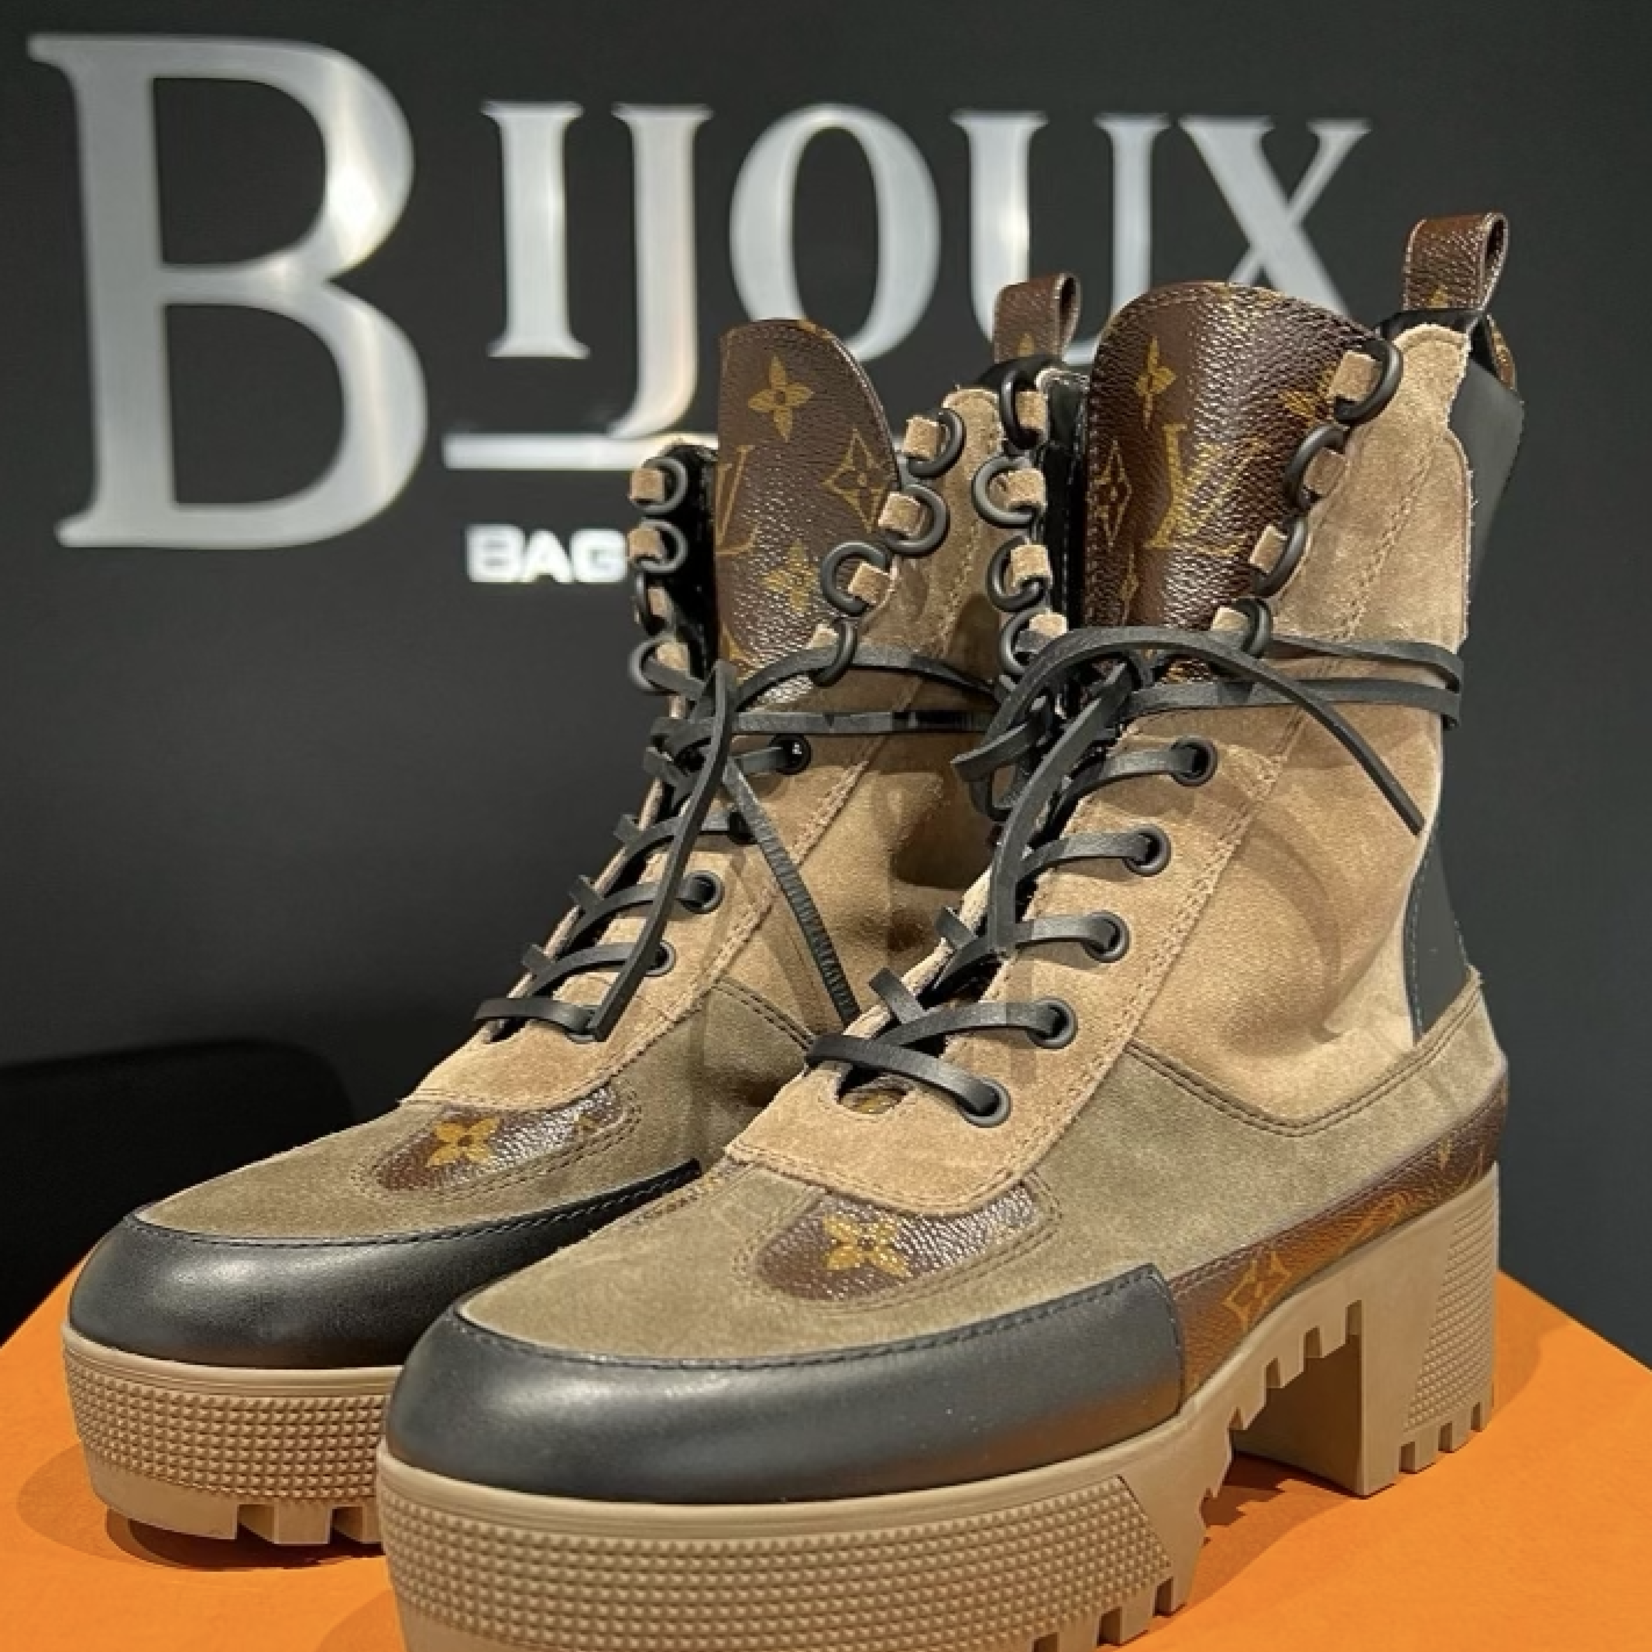 MY LOUIS VUITTON BOOTSSTAR TRAIL  LAUREATE DESERT BOOTSREVIEW SIZING  CARE MY THOUGHTS ETC  YouTube